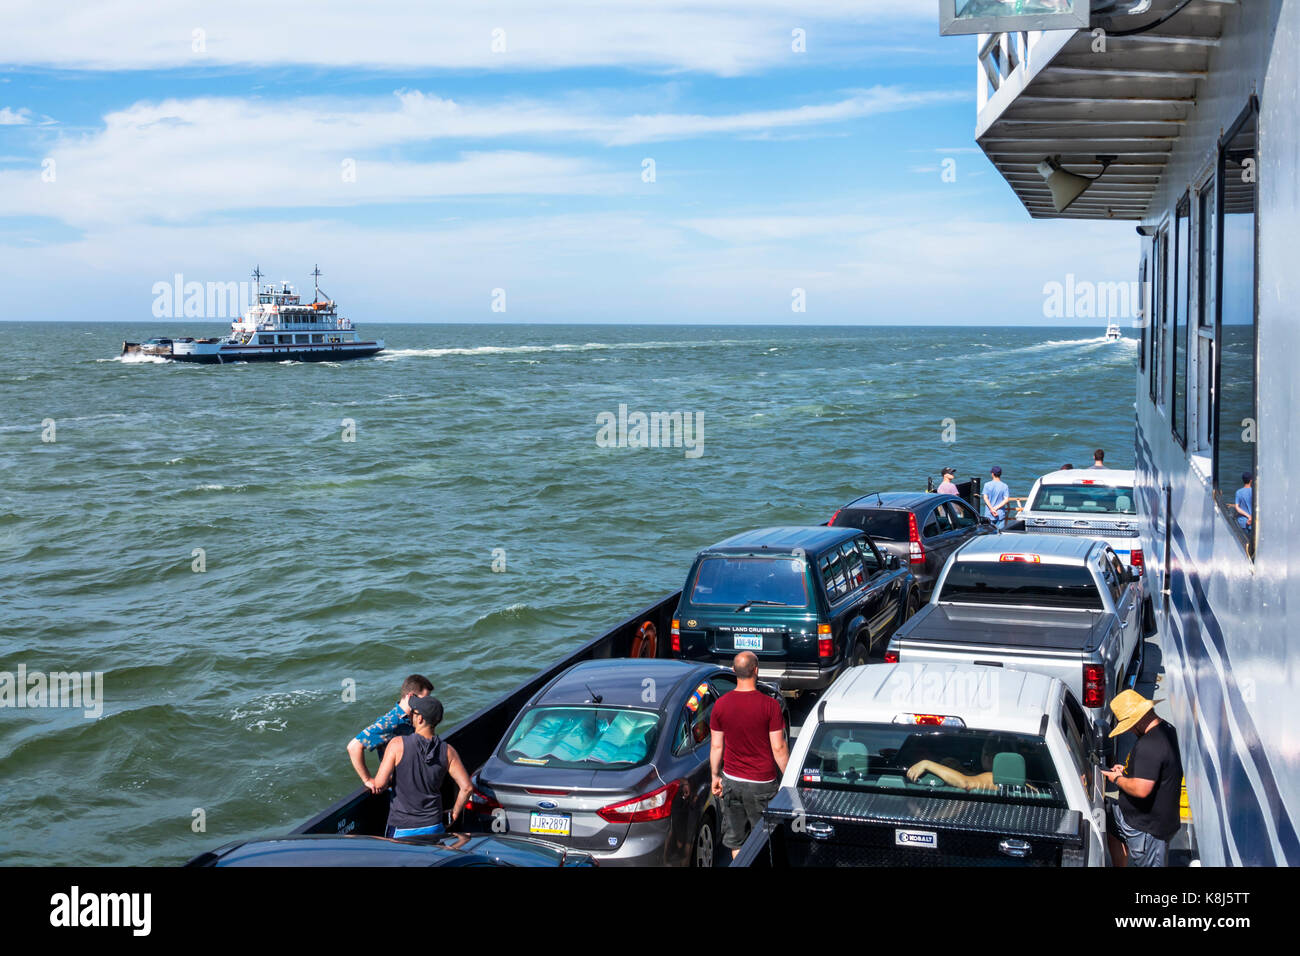 North Carolina,NC,Outer Banks,Pamlico Sound,Ocracoke Island,Hatteras,ferry,boat,water,cars,waves,vehicles,NC170518134 Stock Photo